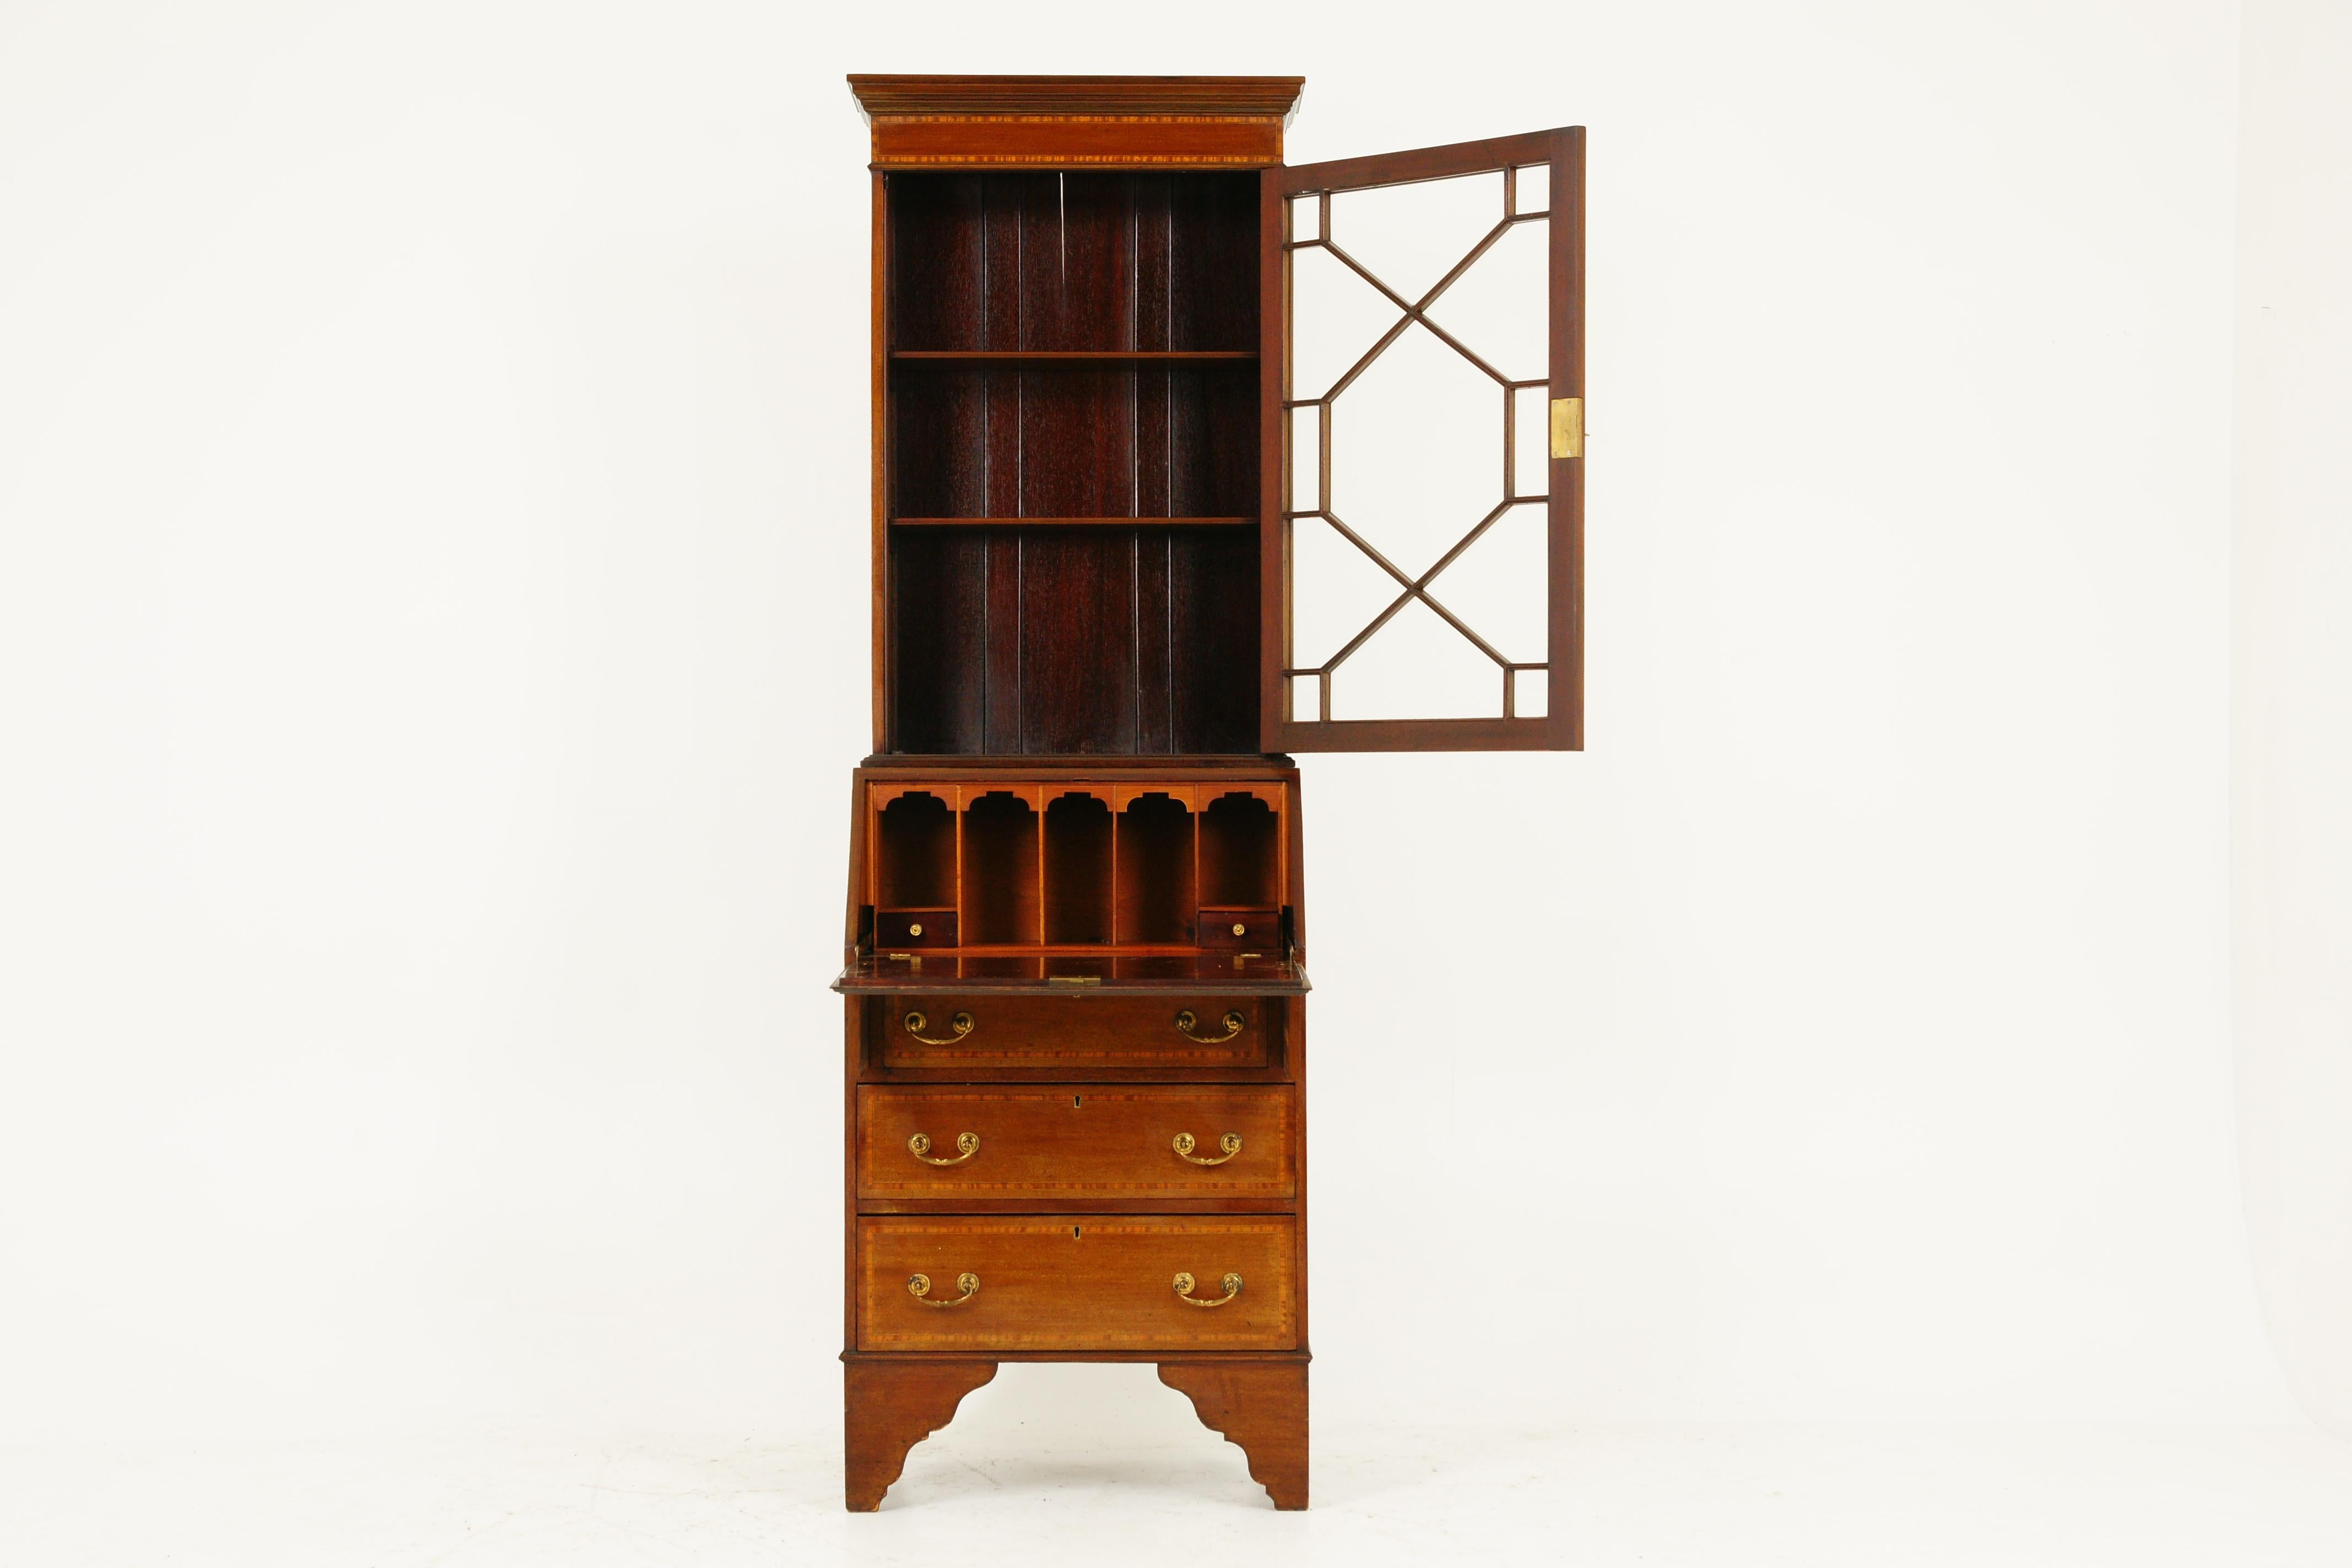 Antique Edwardian inlaid walnut secrétaire bookcase bureau, Scotland 1900, B1636

$1650

Scotland, 1900
Solid walnut and veneer
Original finish
Moulded cornice above
Inlaid glass door with lock
Two adjustable shelves inside the desk with